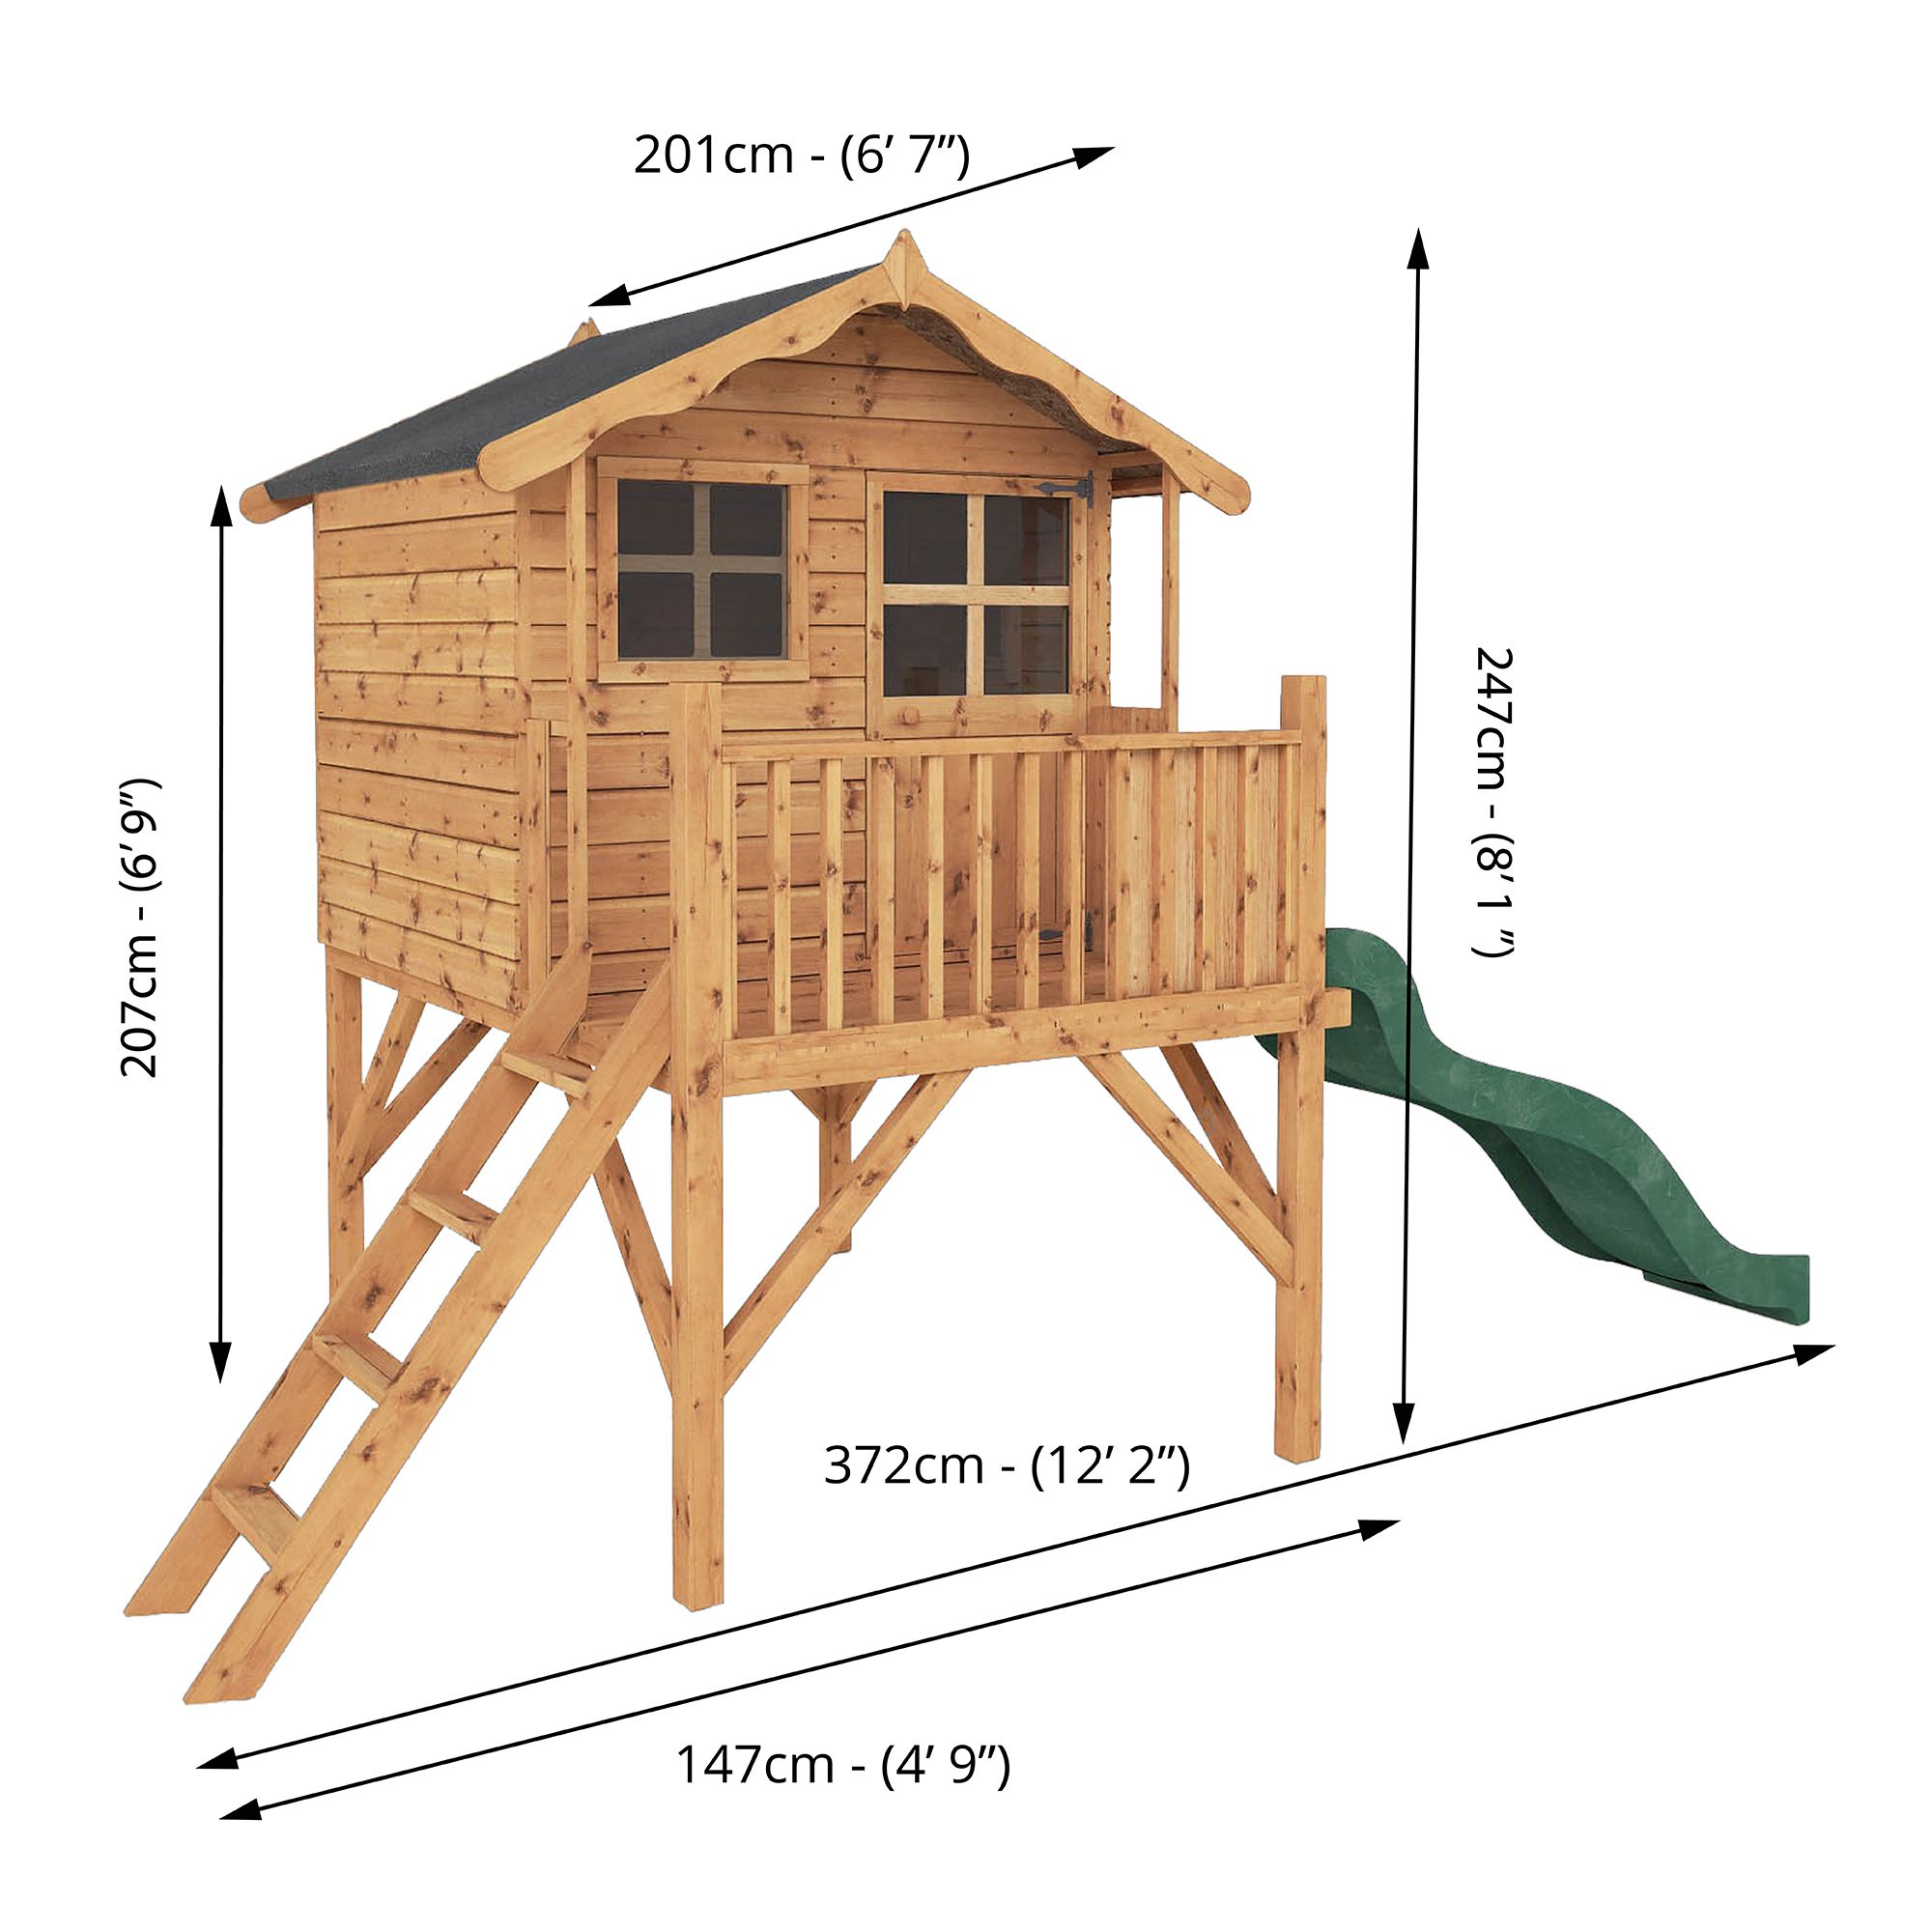 Mercia 12x6 Poppy Apex Shiplap Tower slide playhouse - Assembly service included